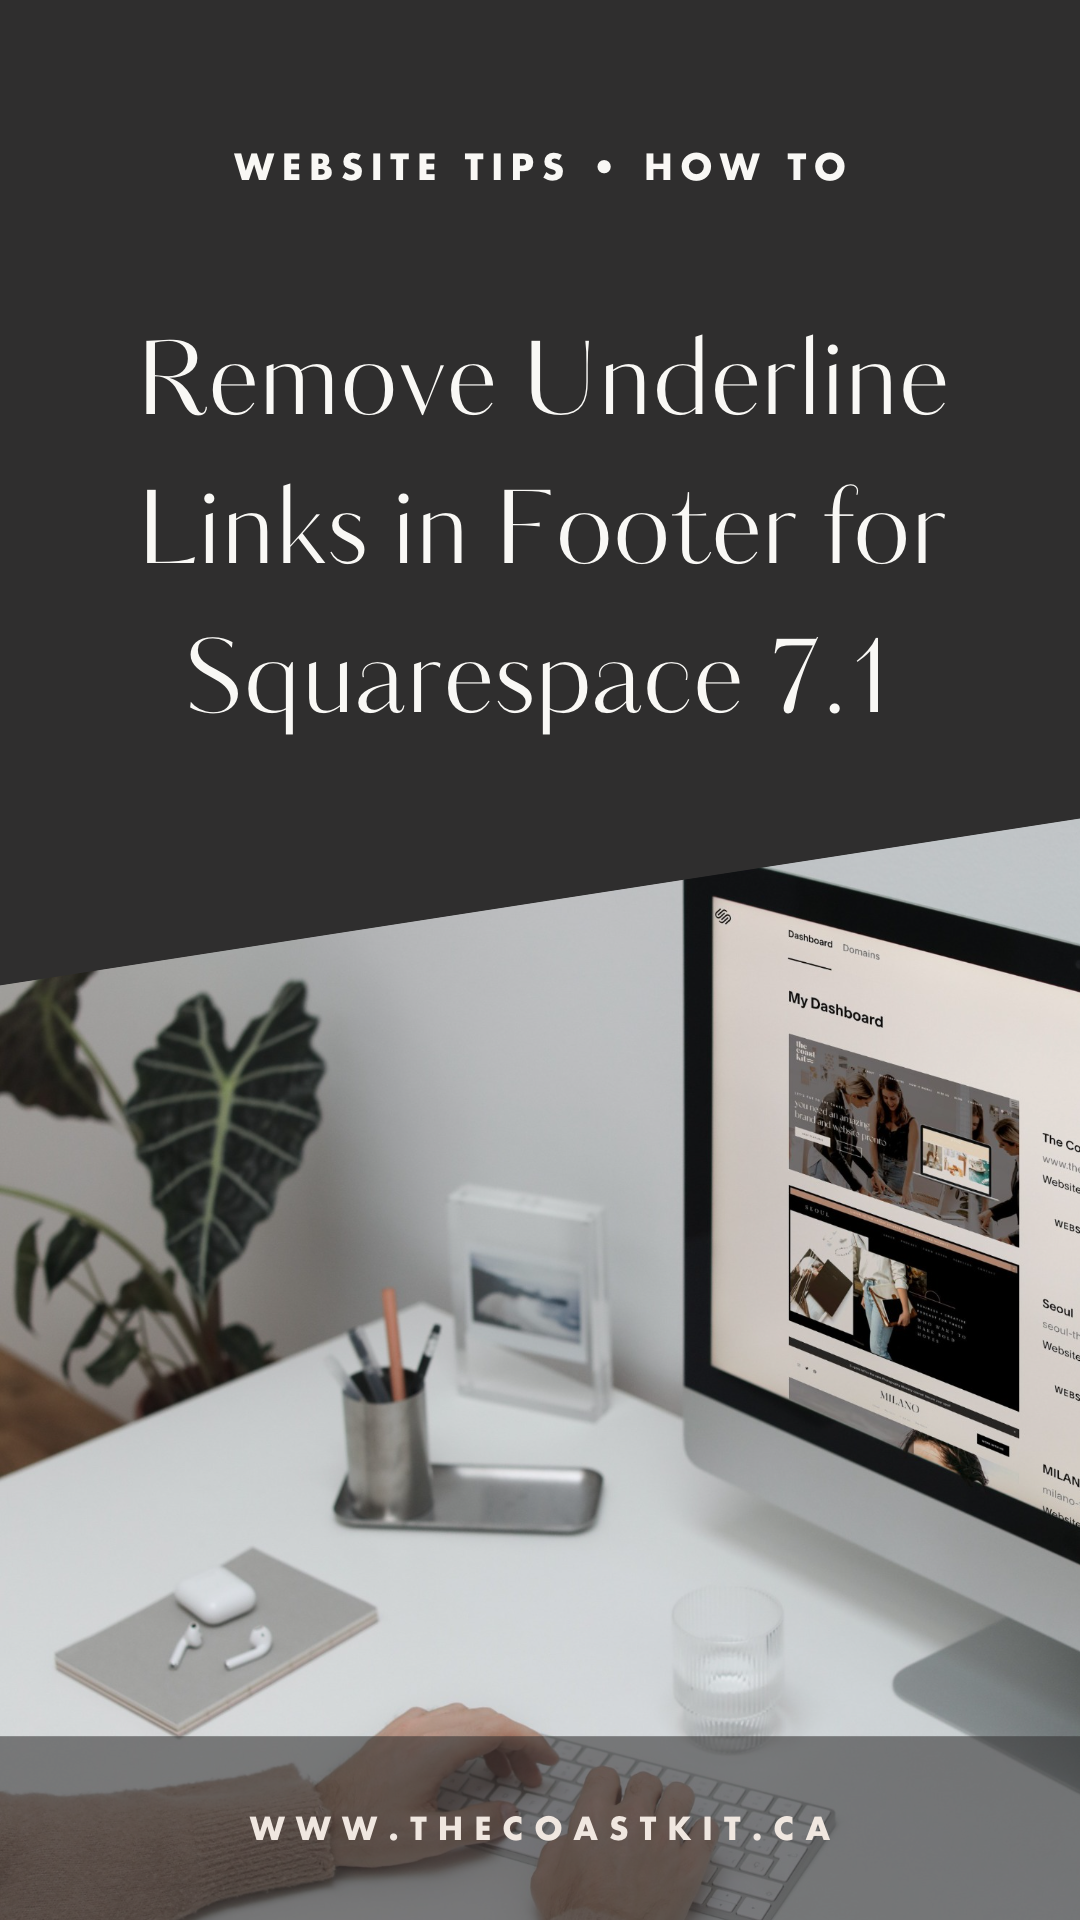 how-to-remove-underline-links-footer-squarespace-7-1.png